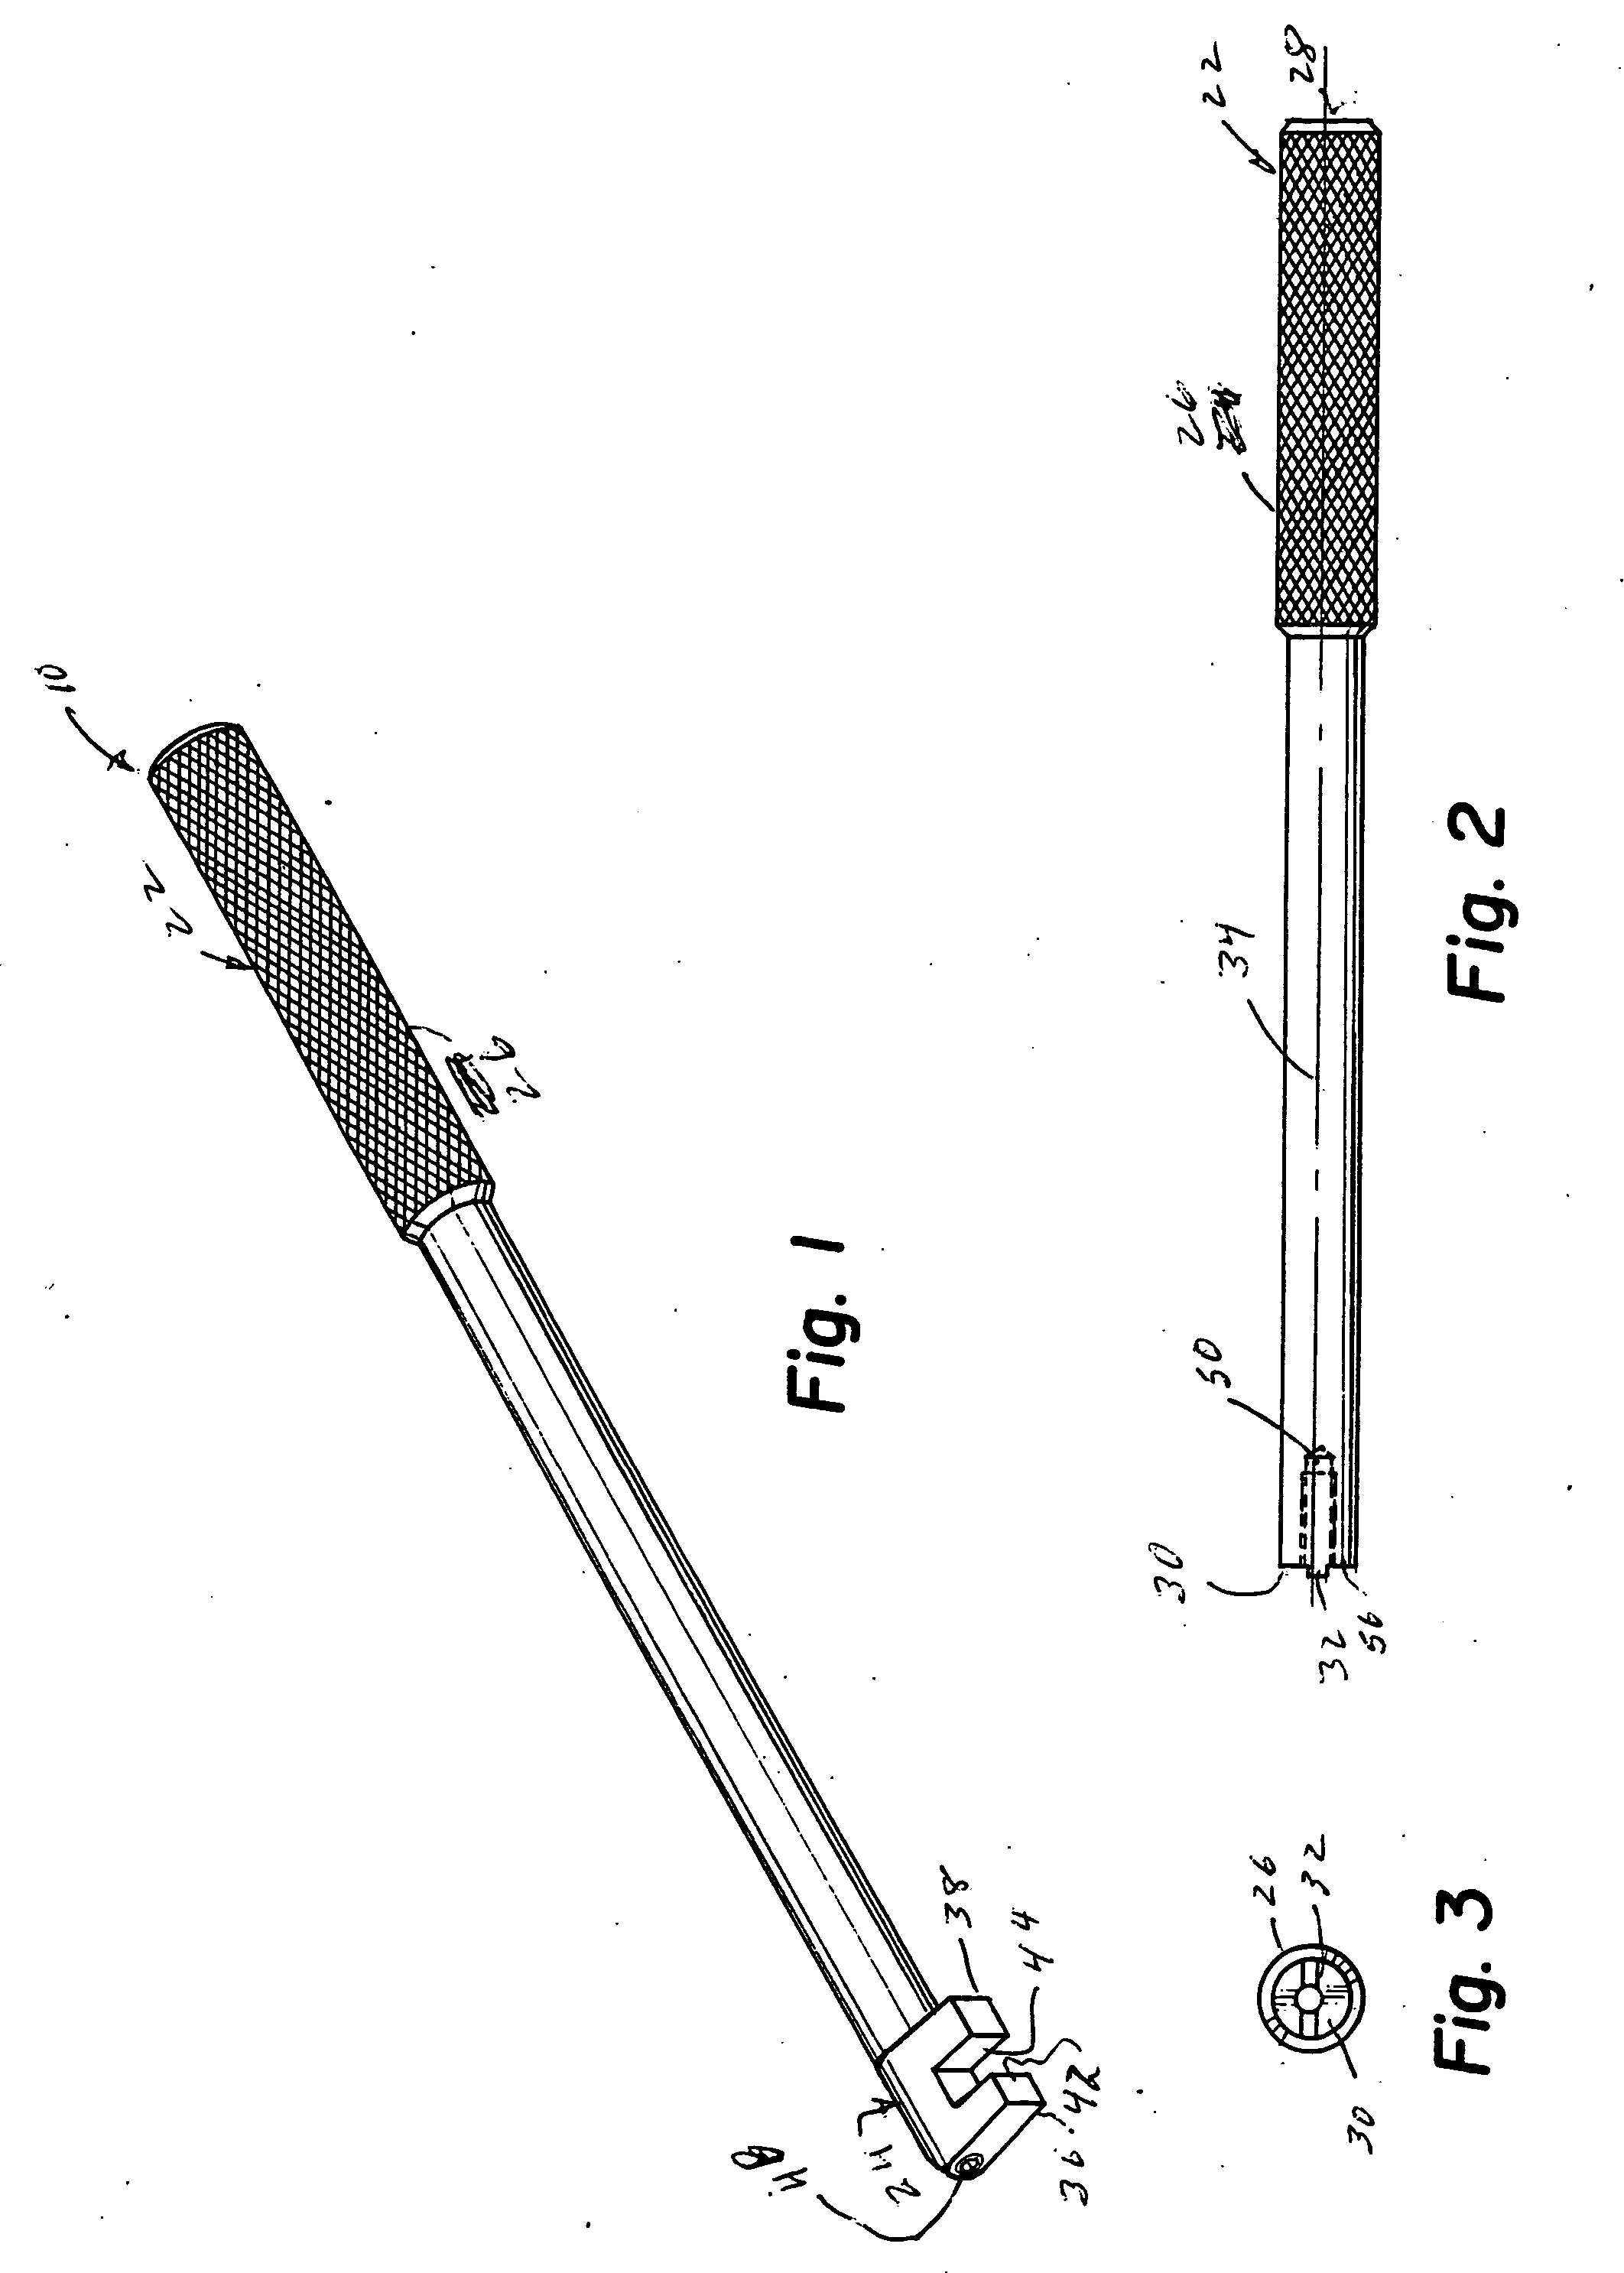 Apparatus for and method of removing a pulley